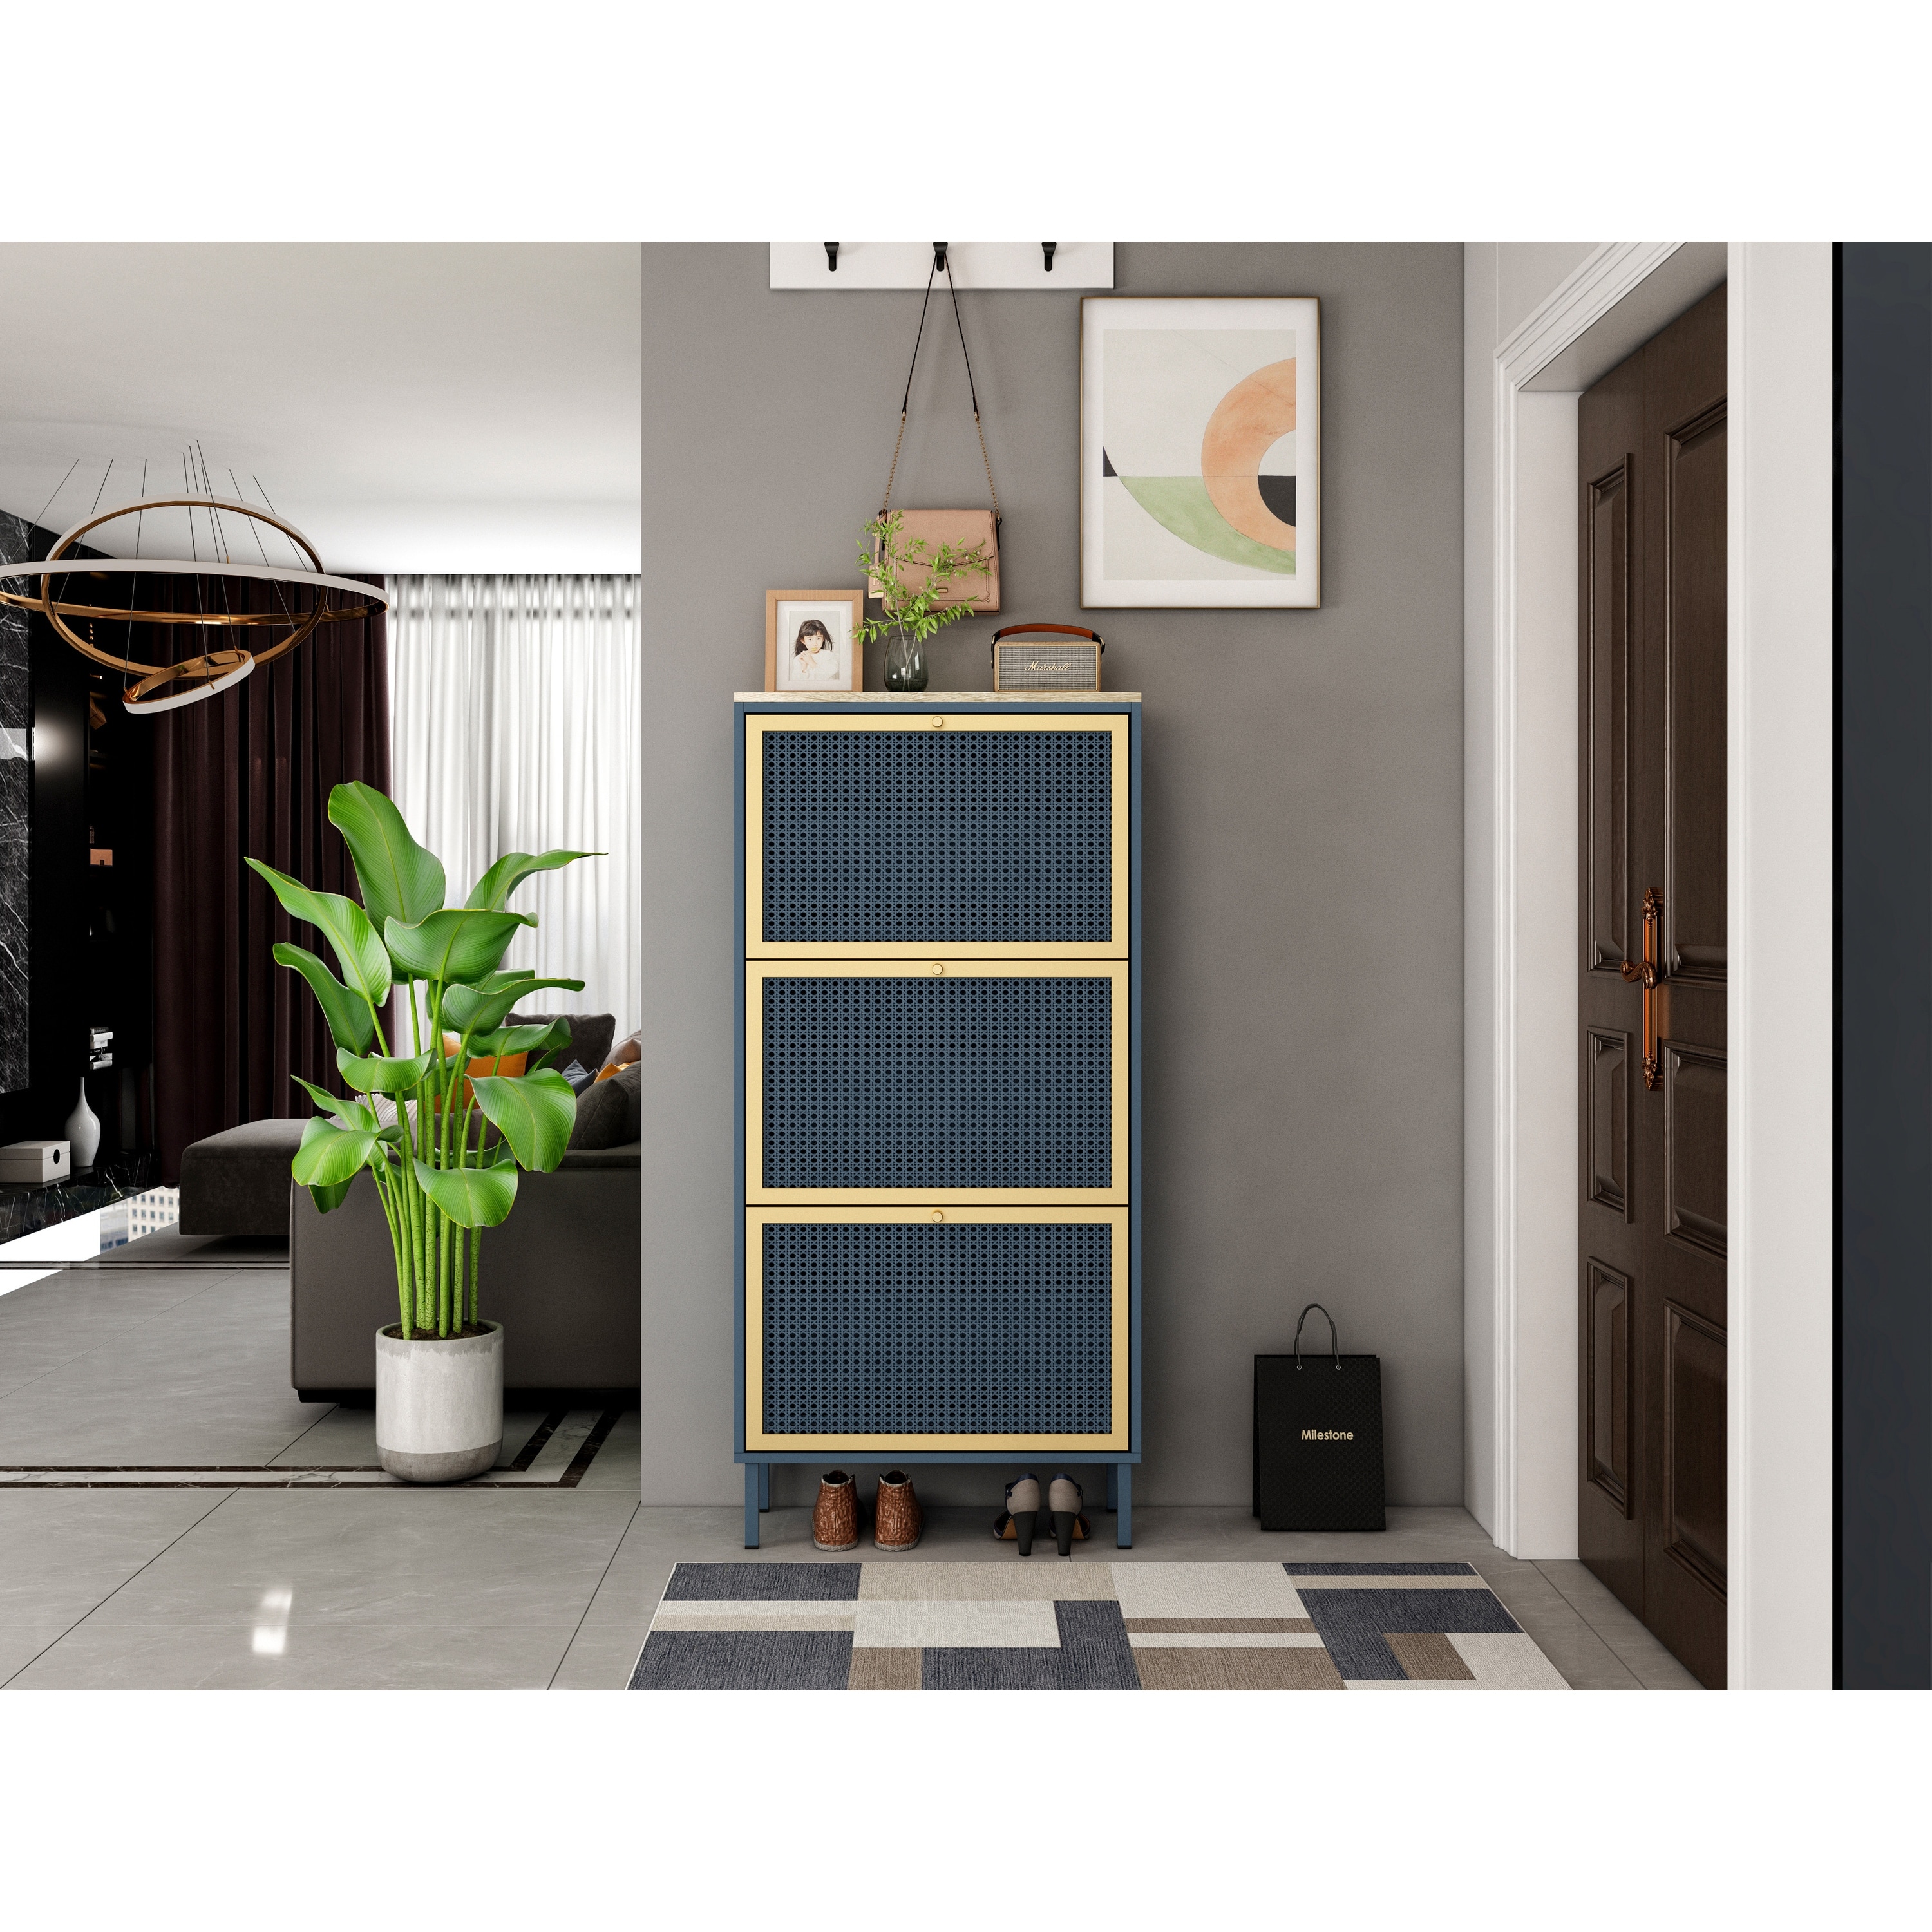 https://ak1.ostkcdn.com/images/products/is/images/direct/0a3511b58a6e9345532be63fb3ed33bfa3fb4c75/Eureka-Mid-century-Entryway-Shoe-Cabinet%2C-18-Pair-Shoe-Rack-Storage-Organizer-with-Flip-Drawers-for-Entryway%2C-Hallway%2C-Bedroom.jpg